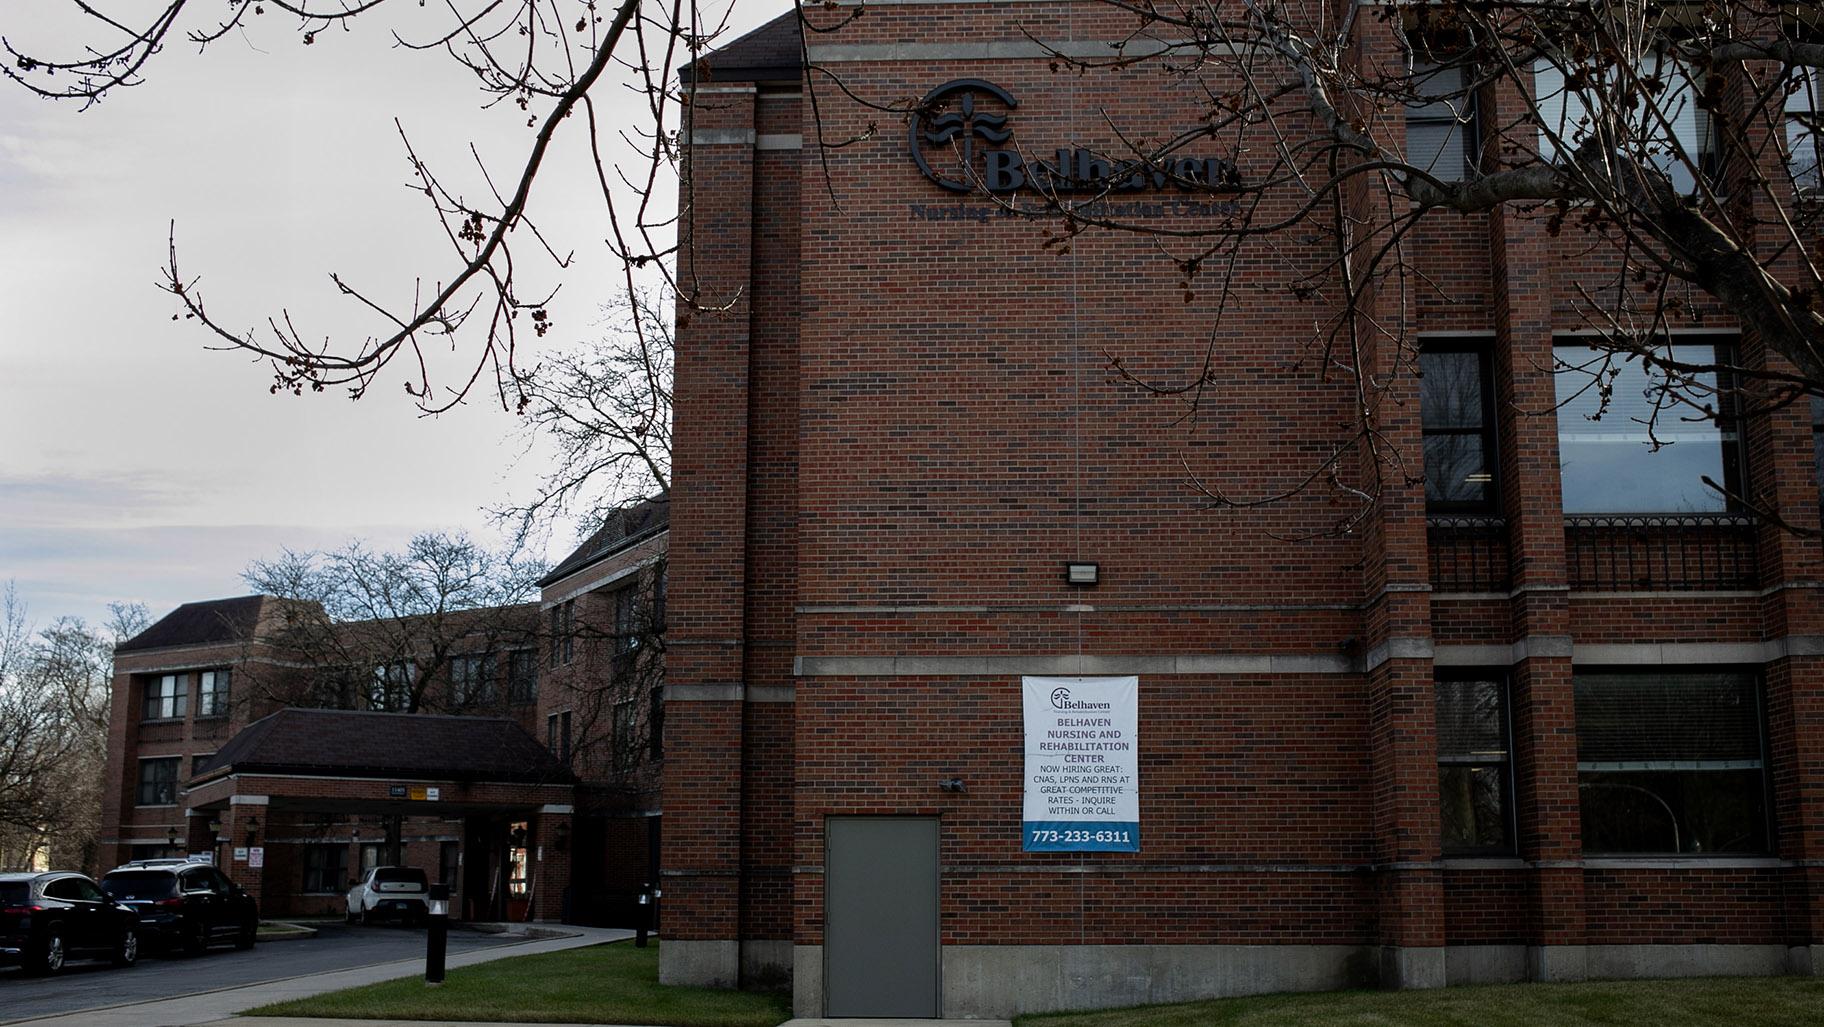 Belhaven Nursing Home and Rehabilitation Center, 11401 S. Oakley Ave., has amassed 18,700 in state fines and more than $879,000 in federal fines over the past four years. (Credit: Brittany Sowacke)